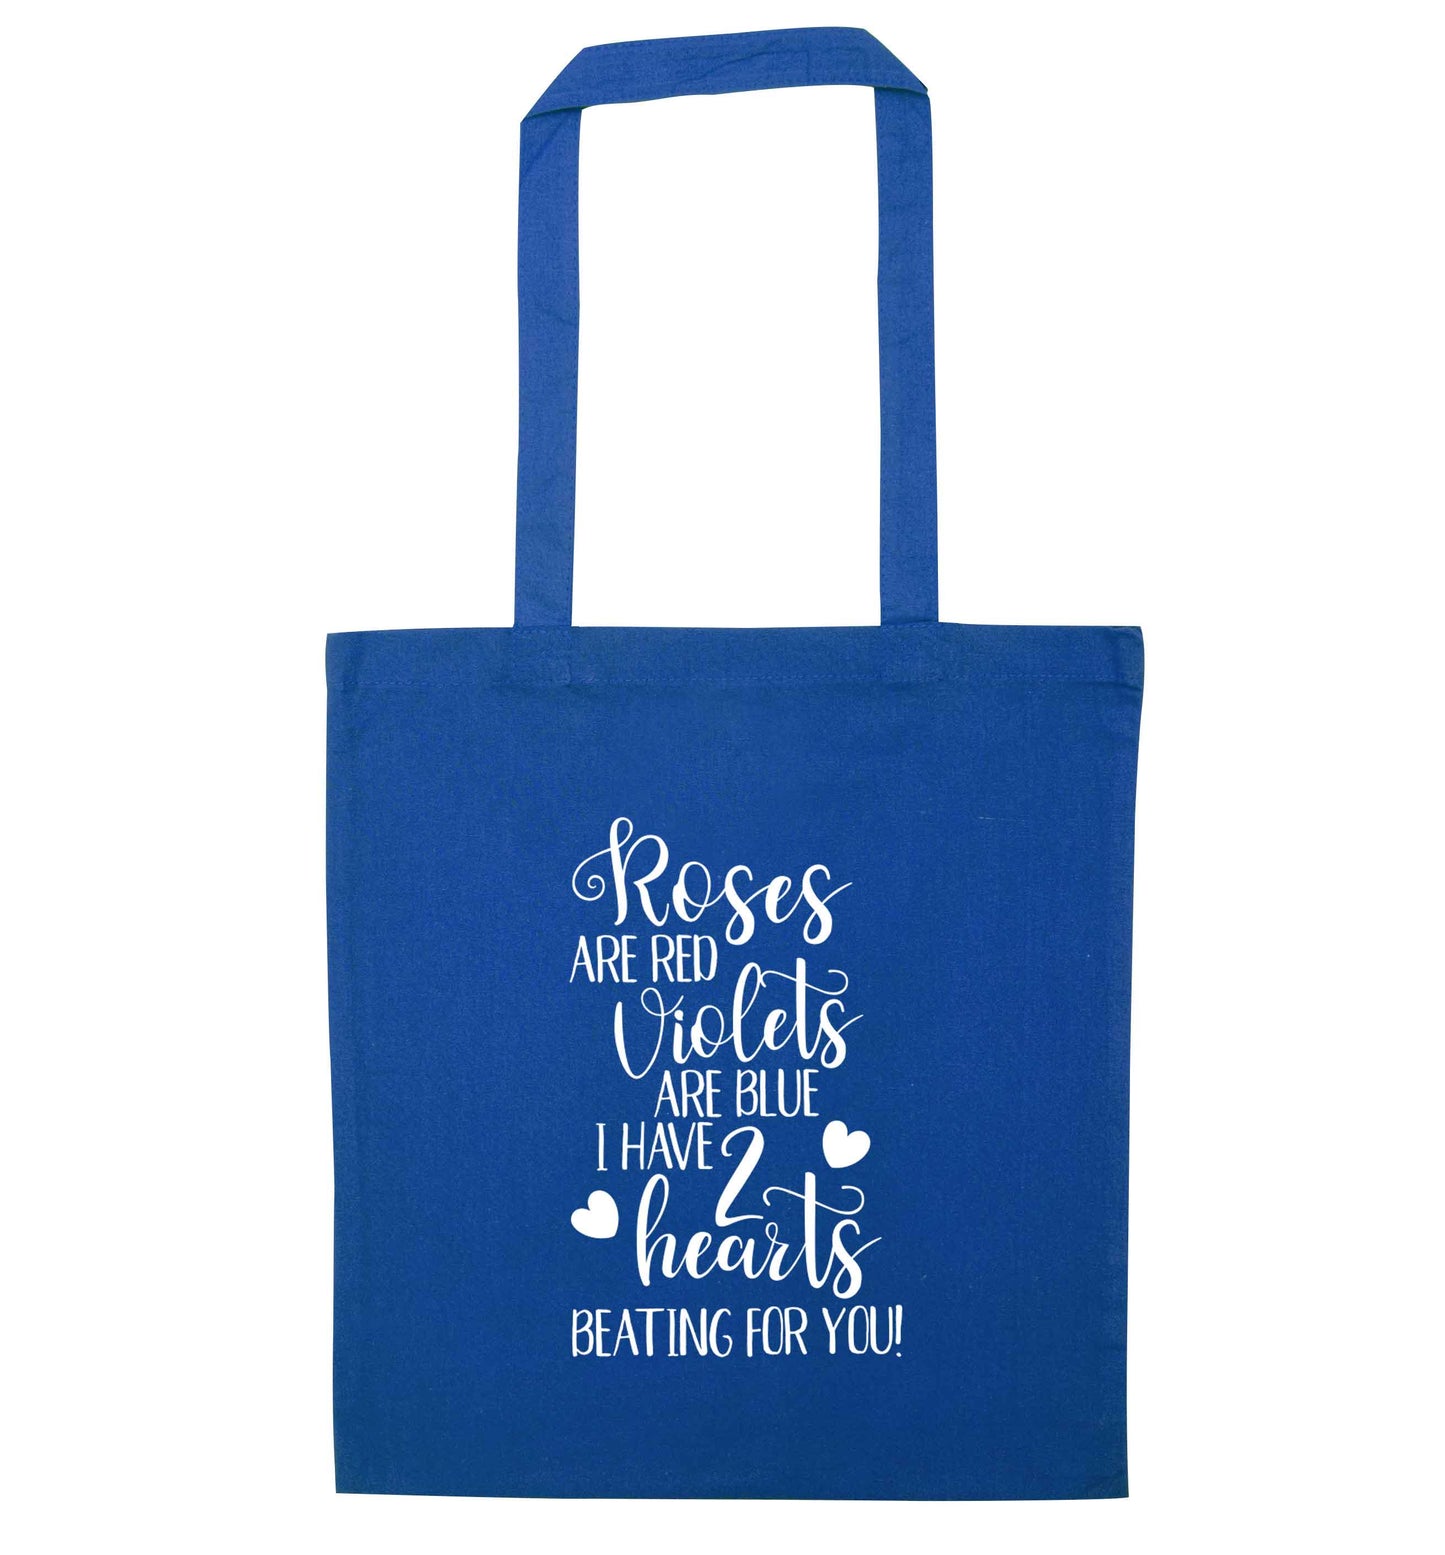 Roses are red violets are blue I have two hearts beating for you blue tote bag